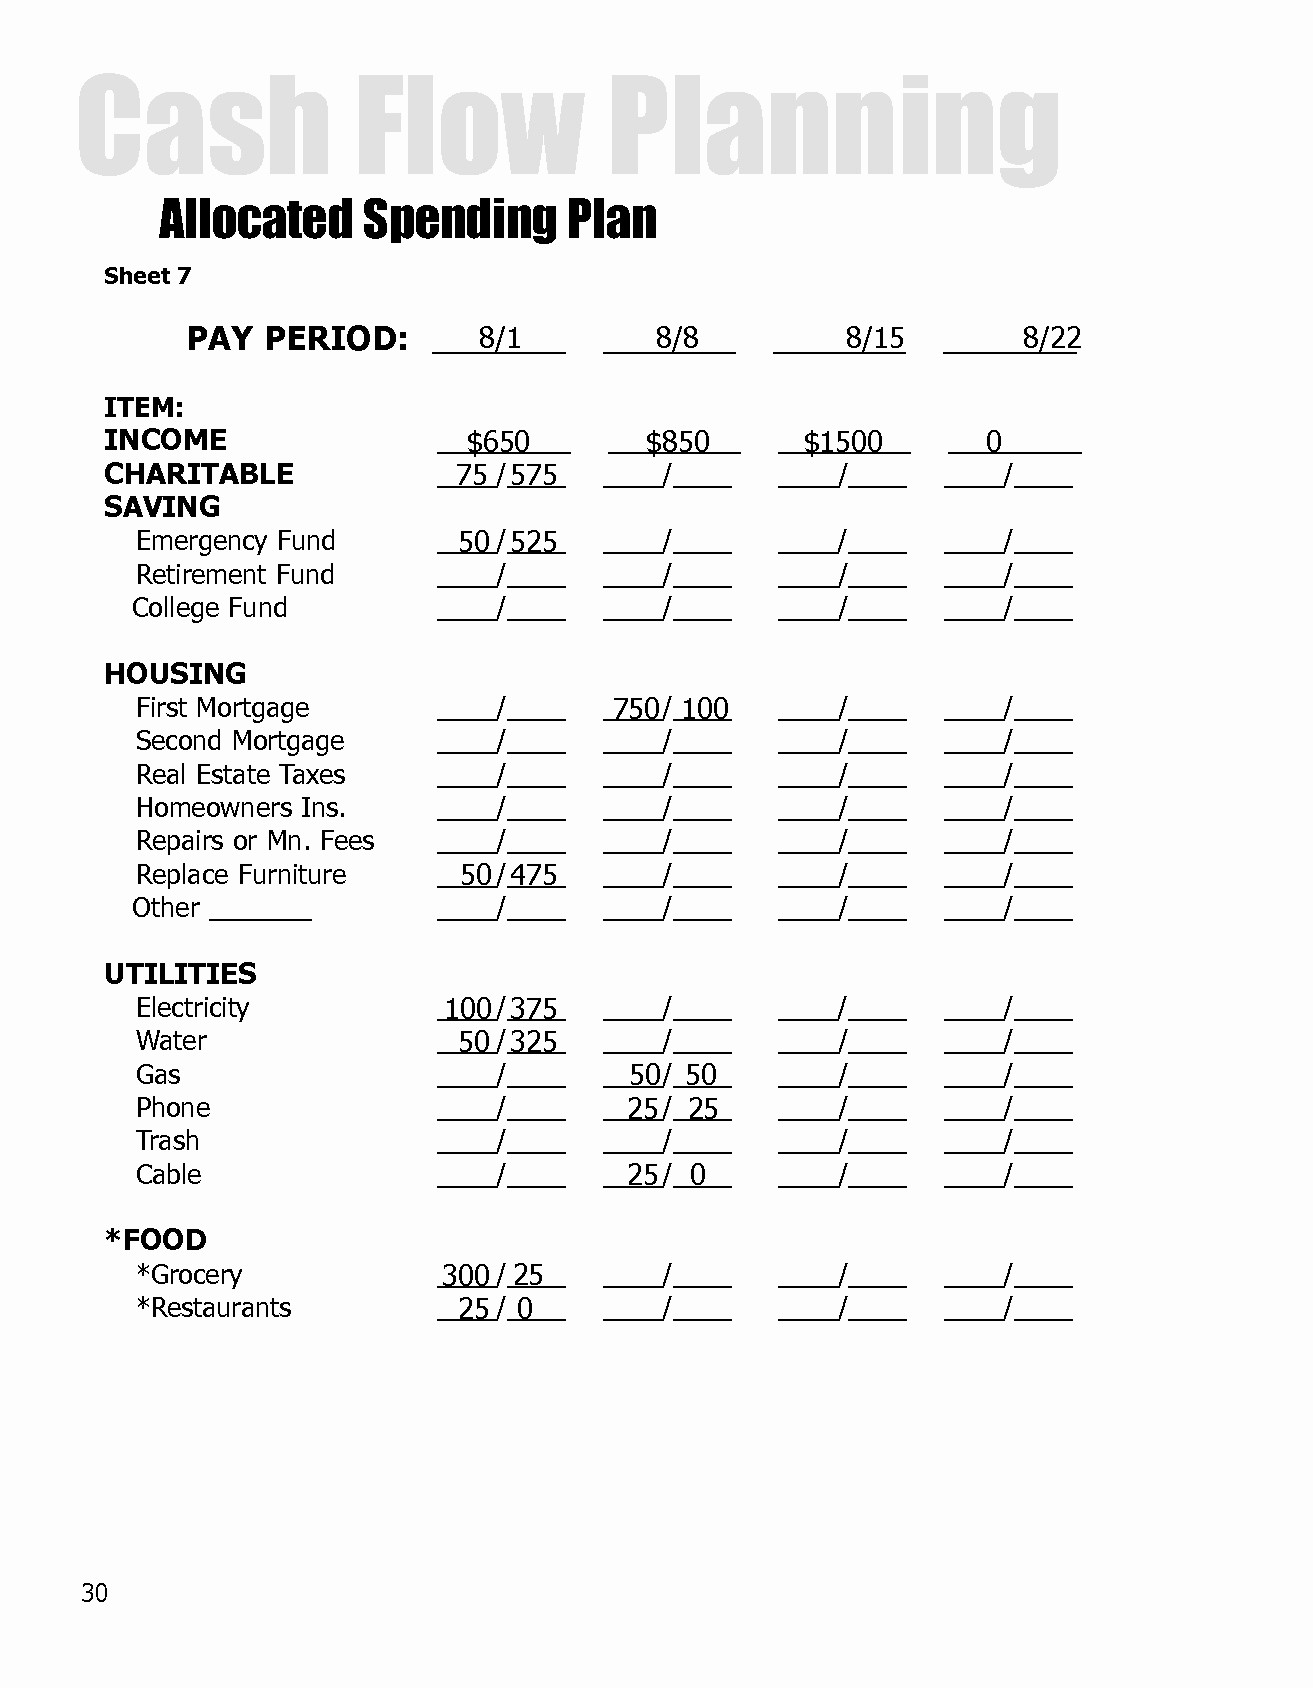 Financial Peace University Forms Form Templates Allocated Spending Document Dave Ramsey Plan